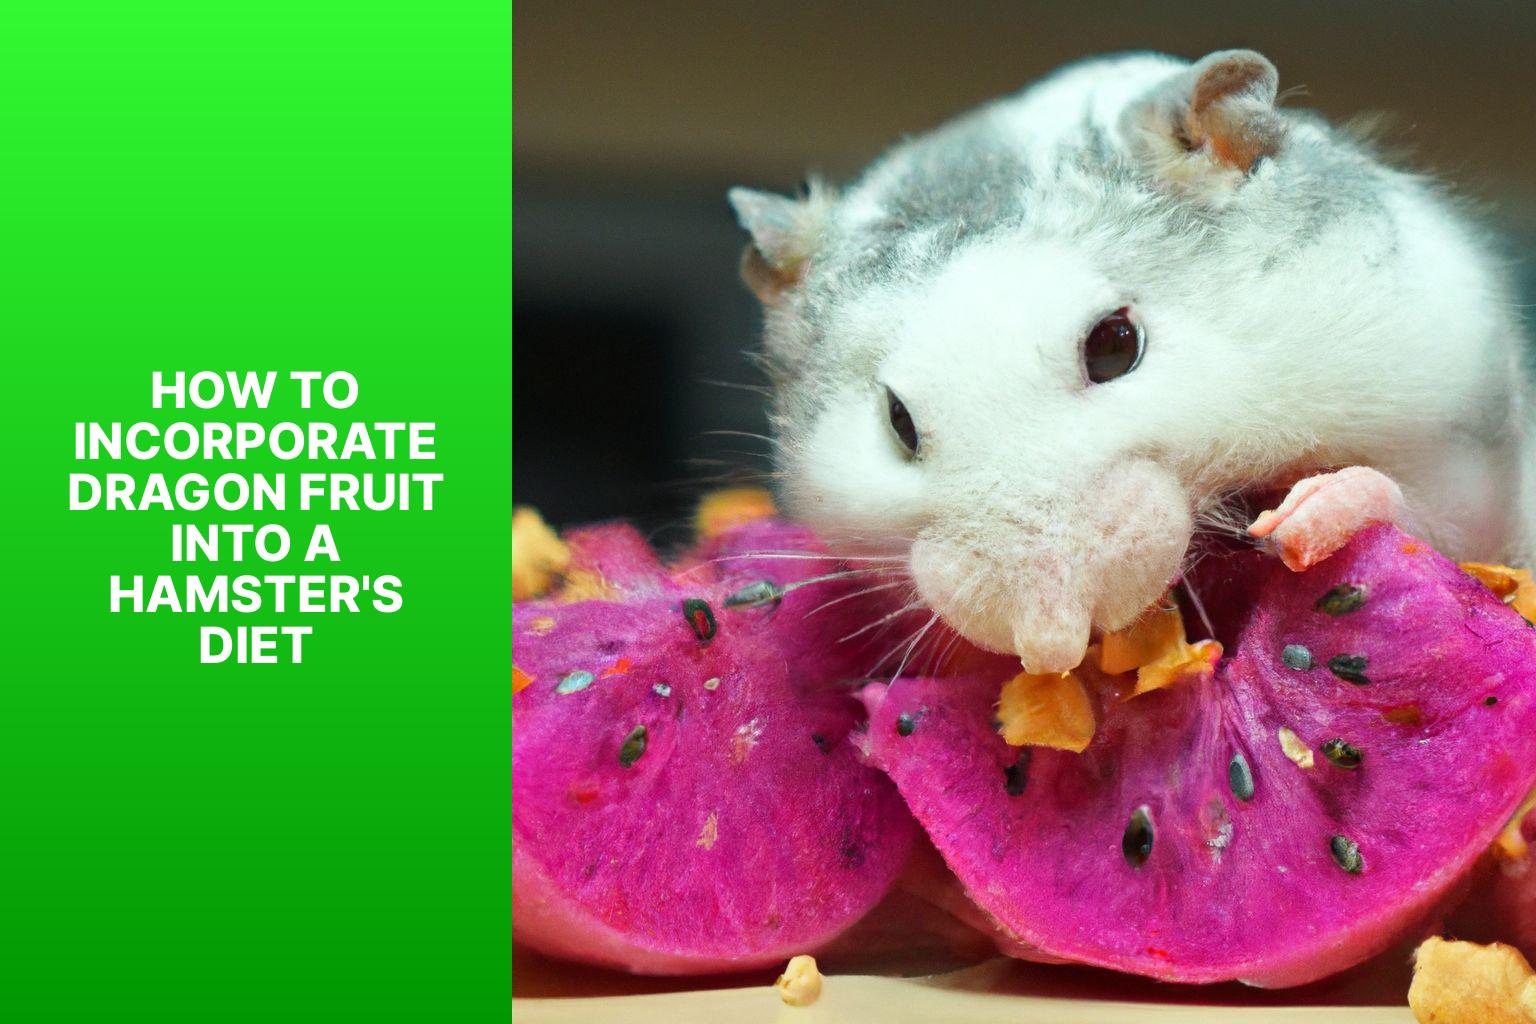 How to Incorporate Dragon Fruit into a Hamster